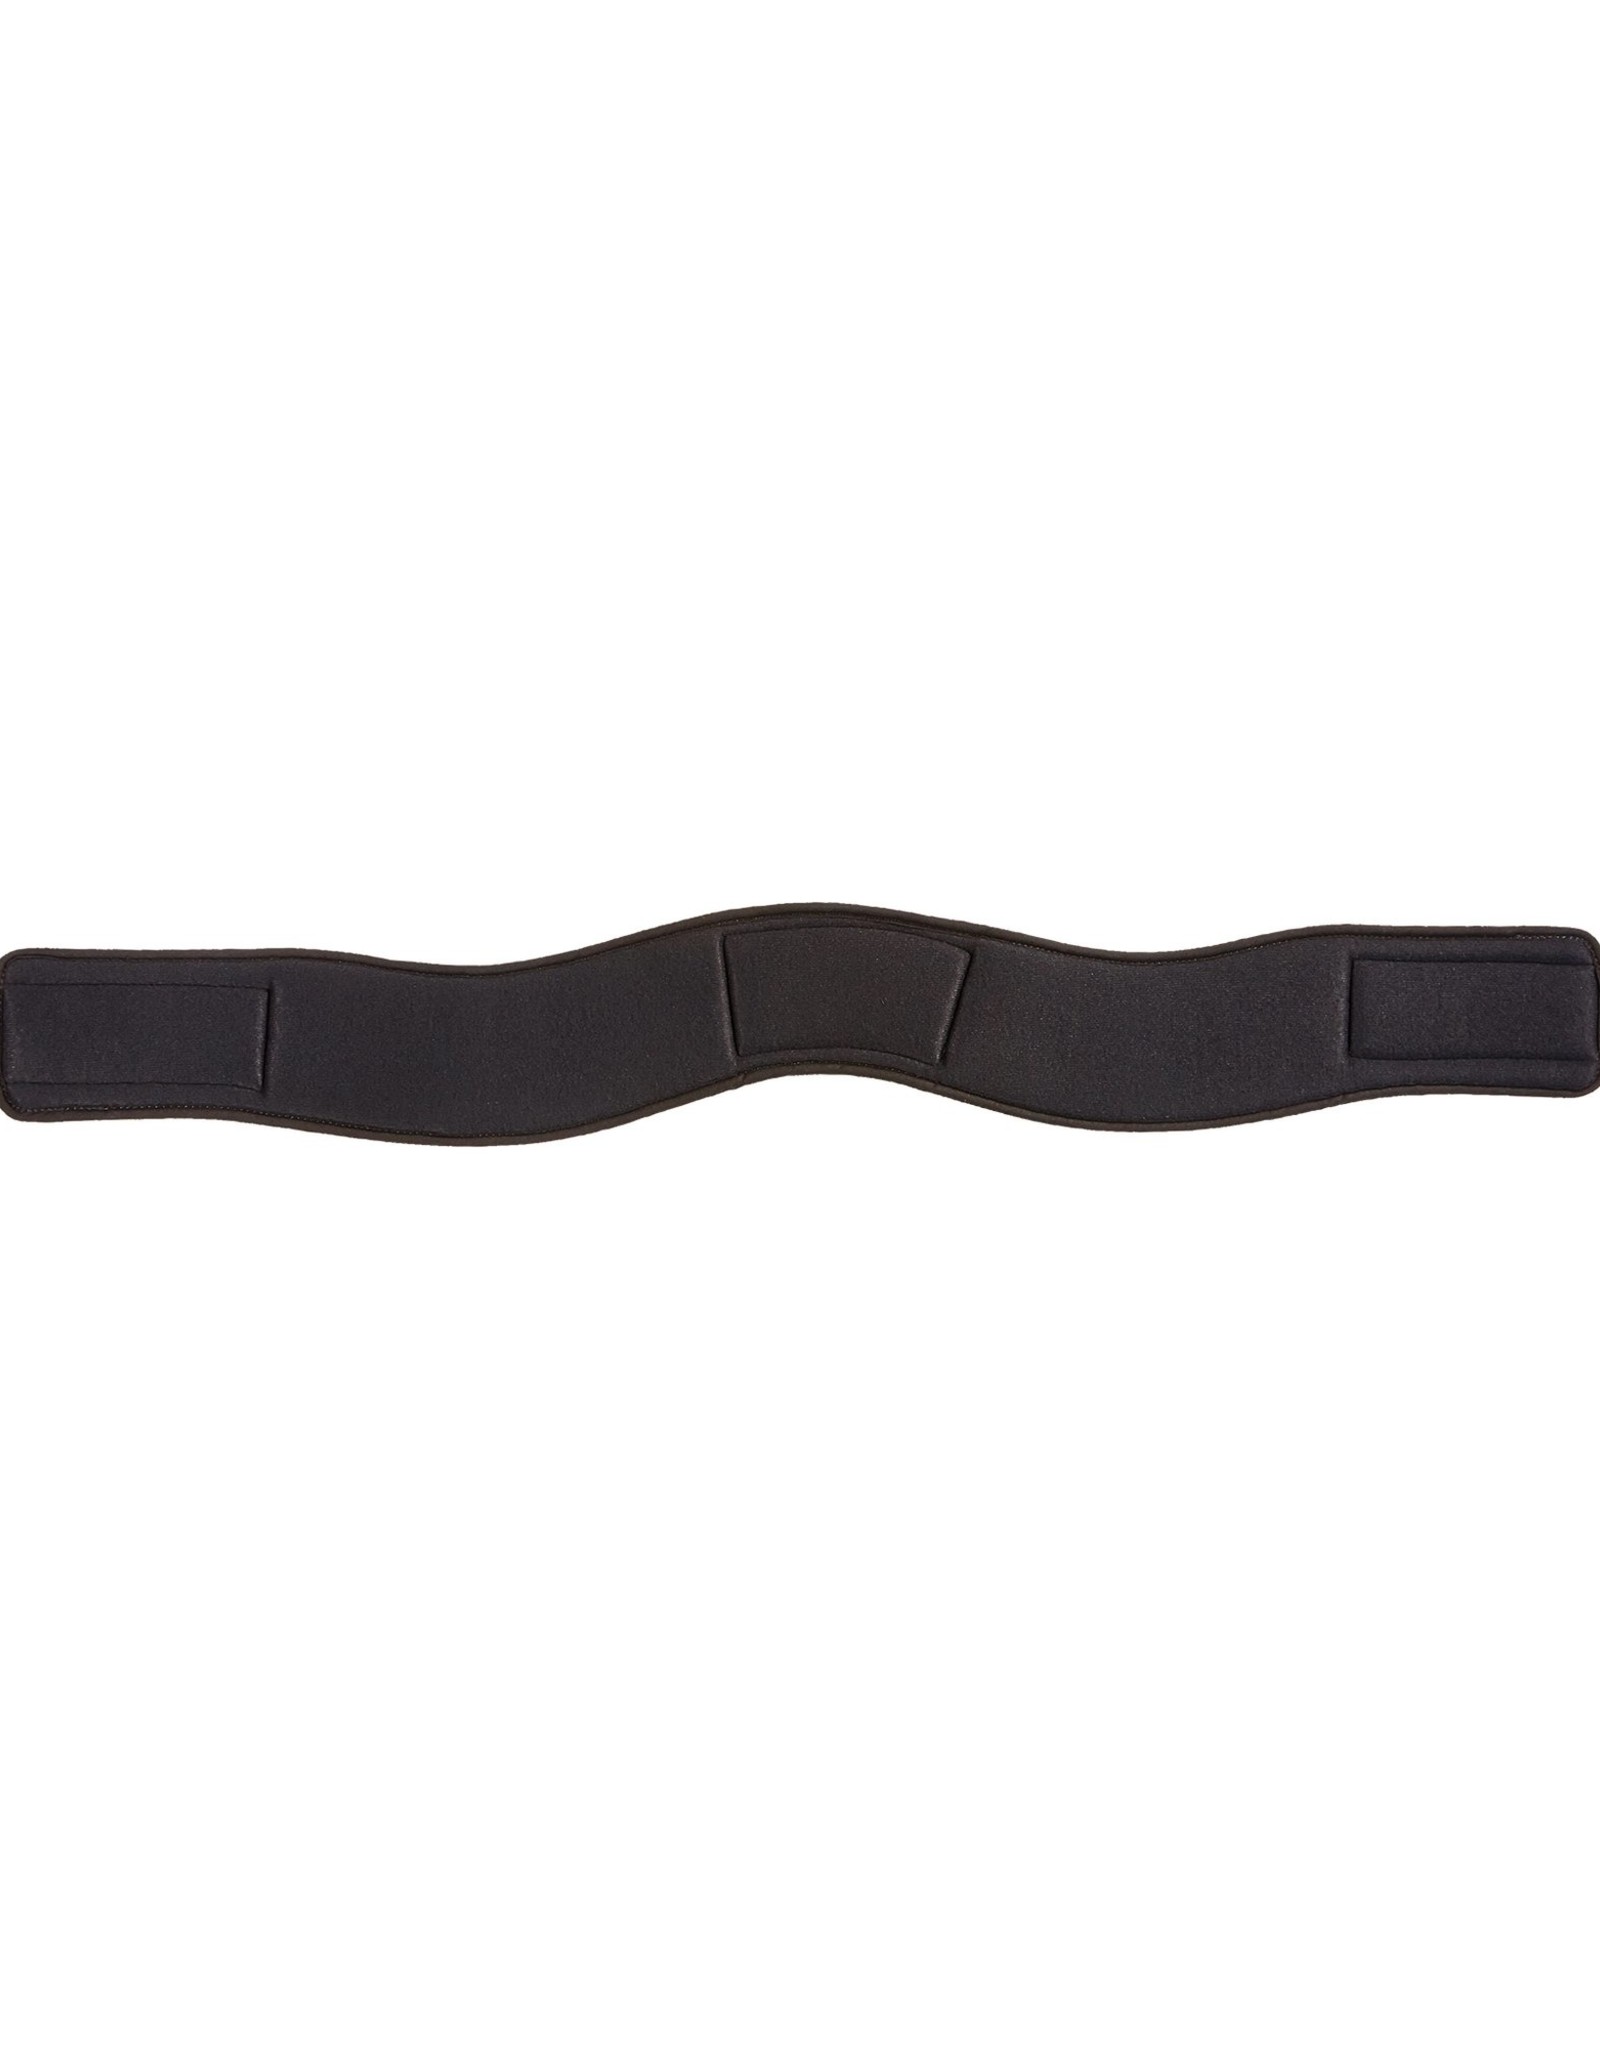 EQUIFIT HUNTER GIRTH WITH T-FOAM LINER